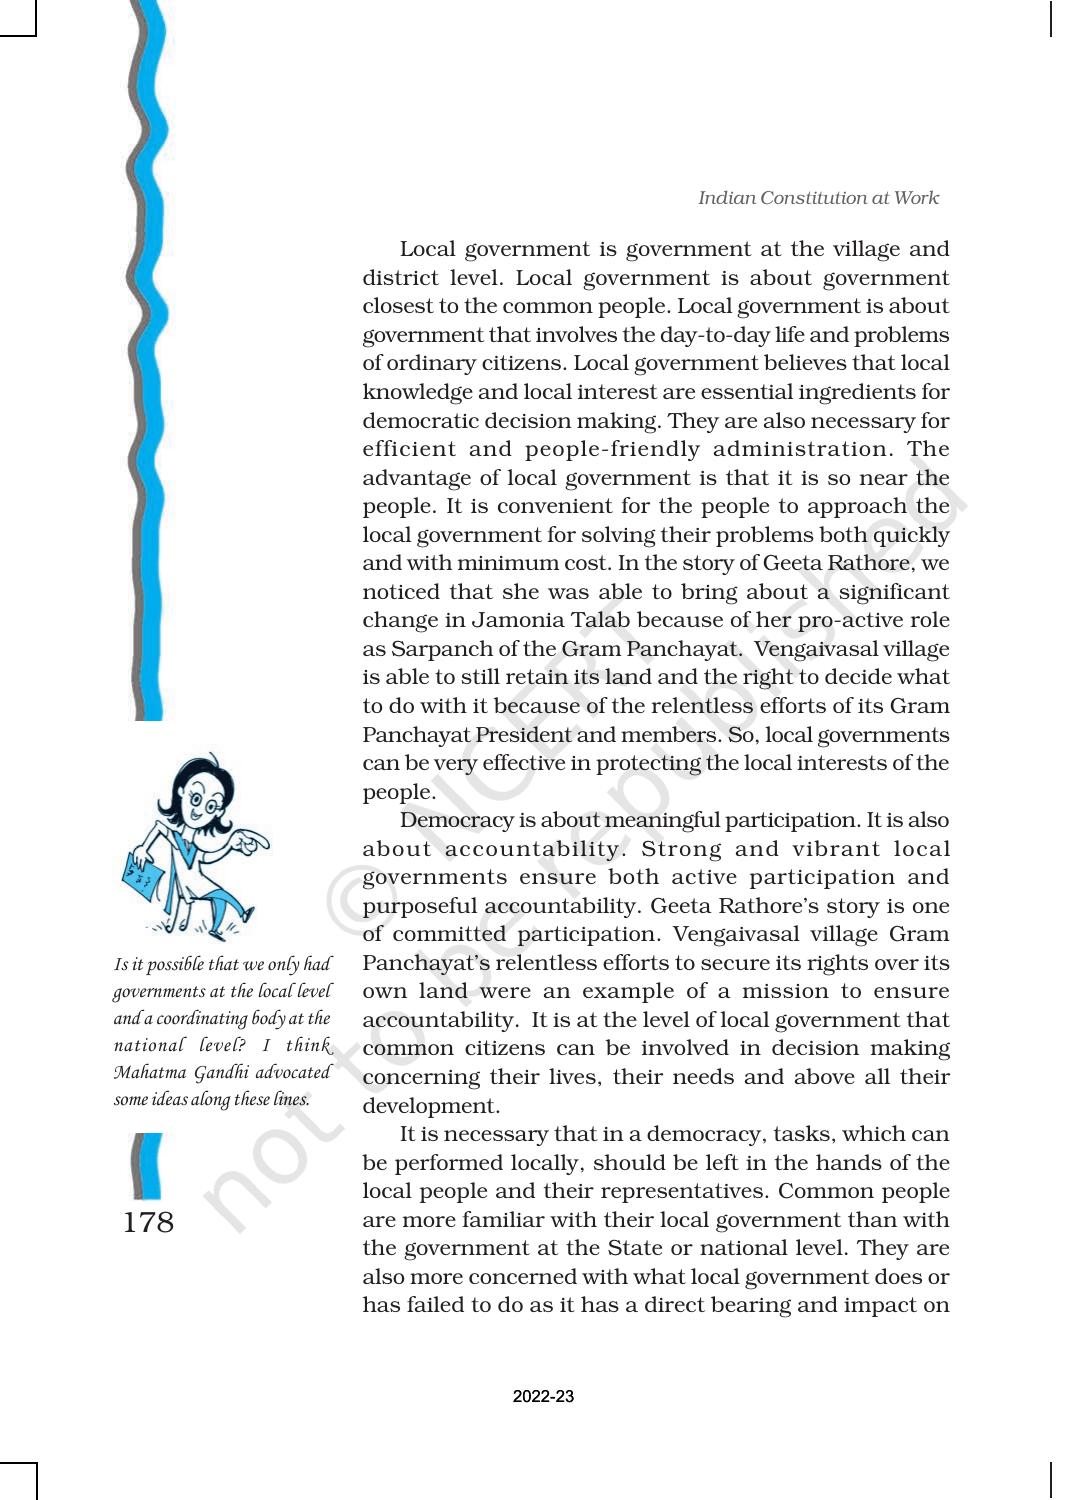 NCERT Book for Class 11 Political Science (Indian Constitution at Work) Chapter 8 Local Governments - Page 3